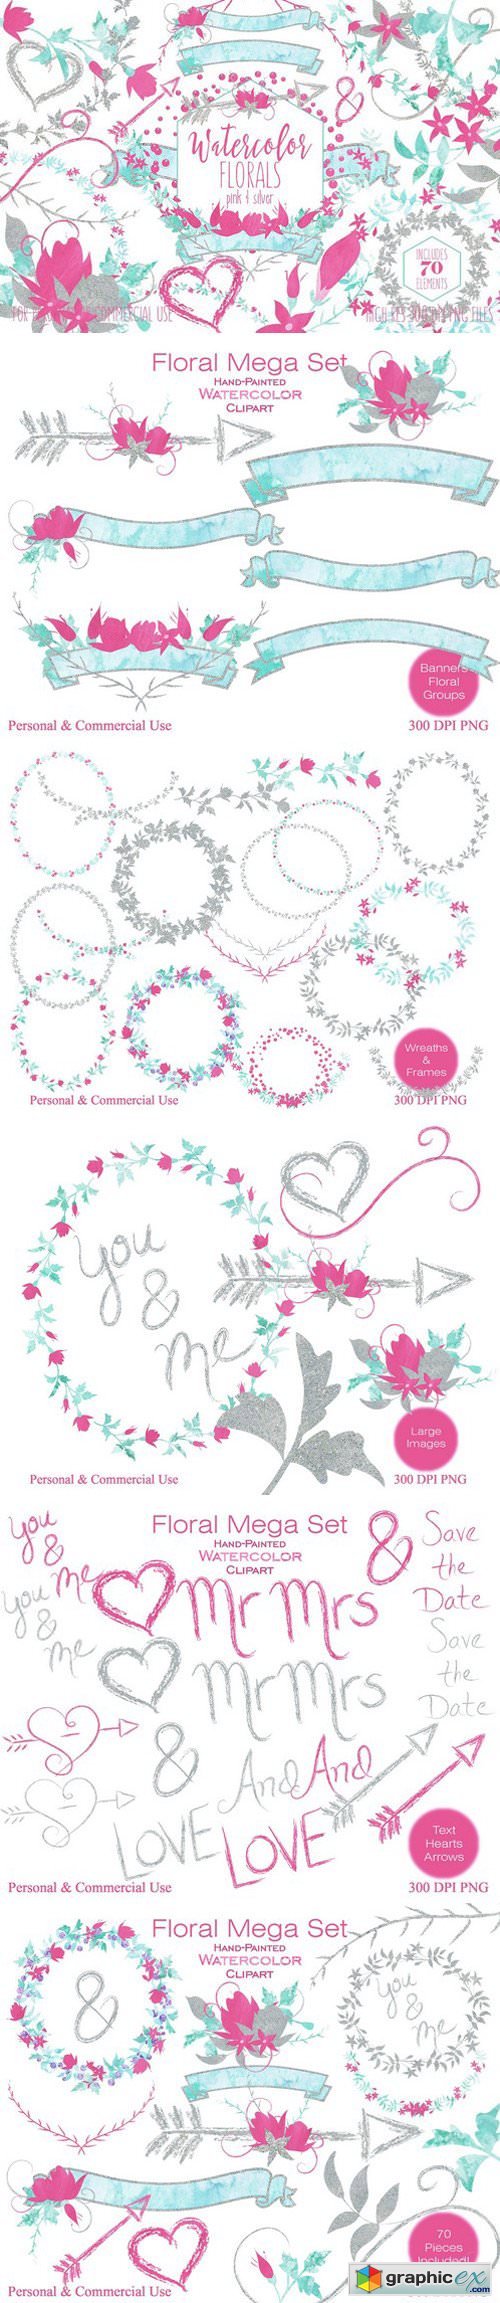 Pink & Silver Watercolor Floral Set